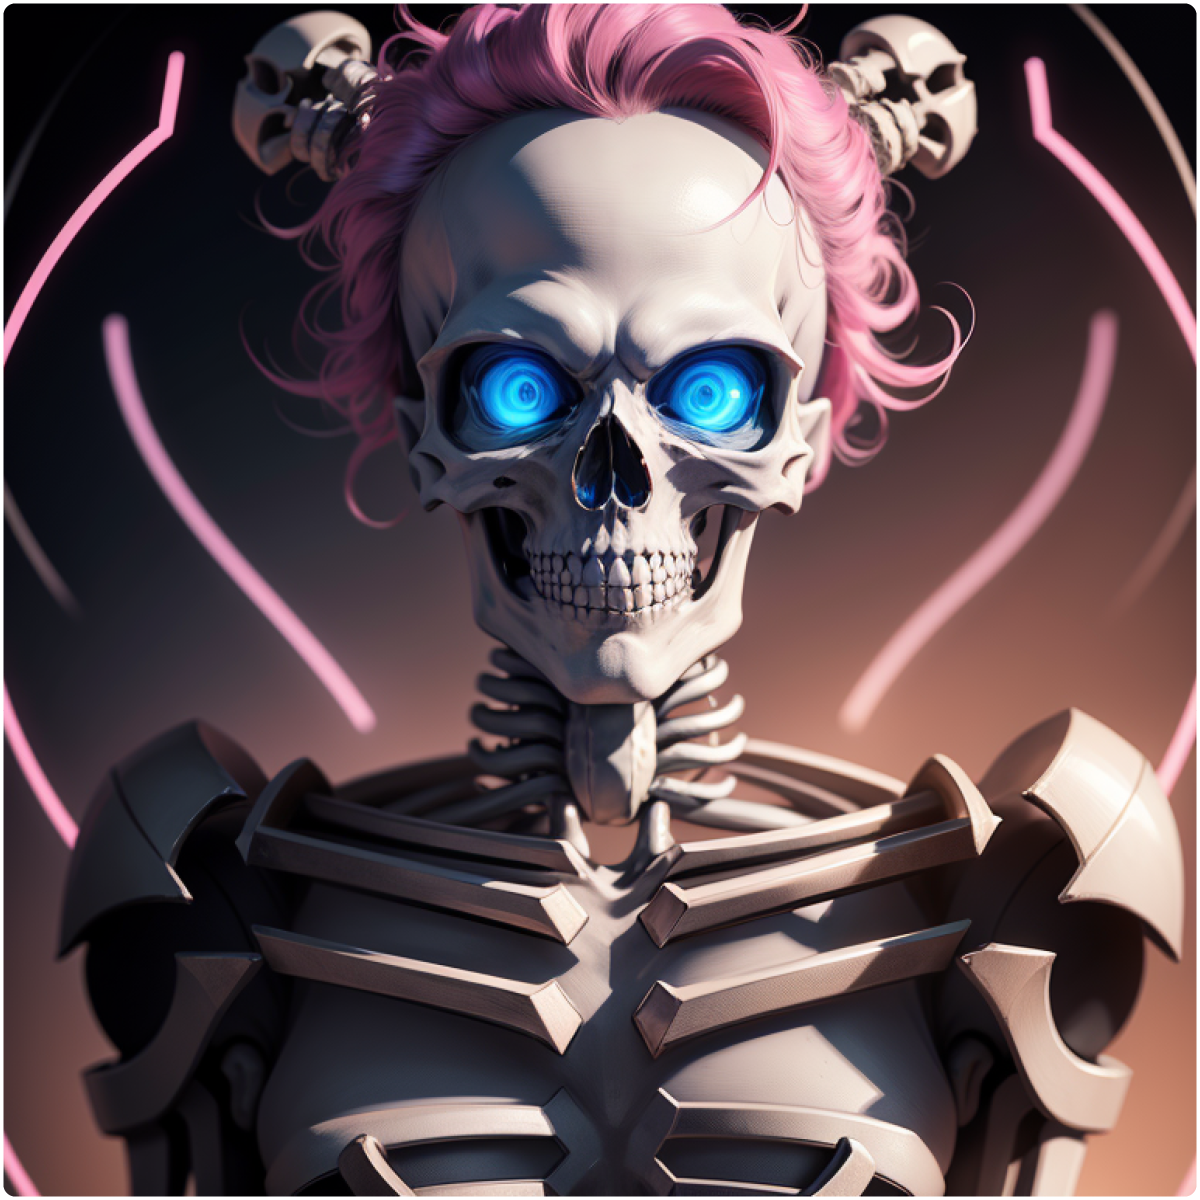 Generated image #2 from Txt2img on Think Diffusion, showing a girl that's turned into a skeleton surrounded by neon lights